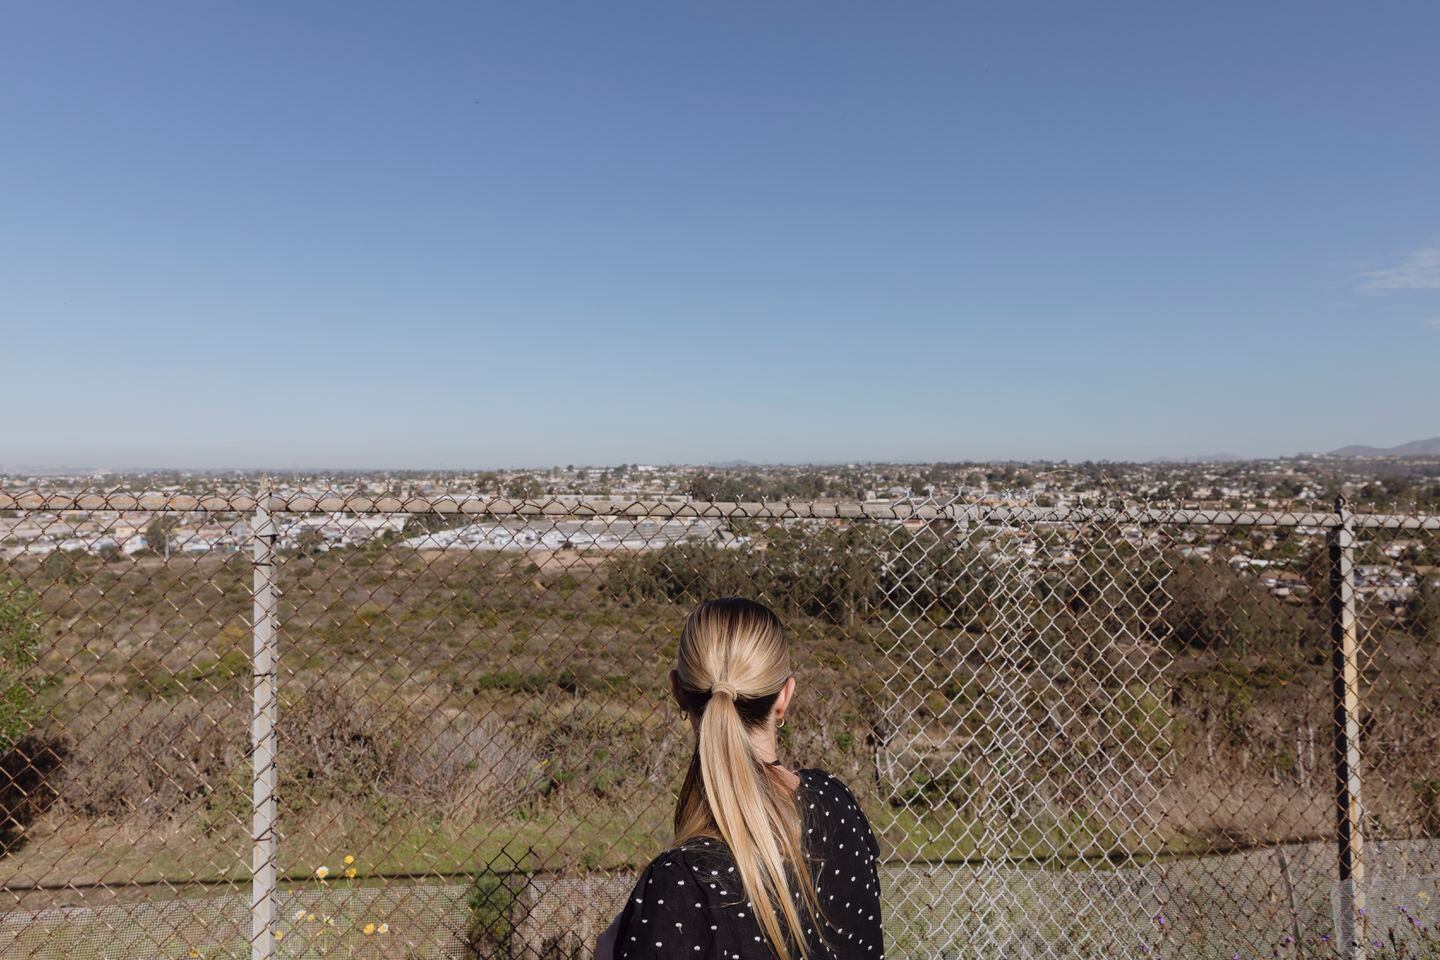 Julia Sutton, a social worker for the Chula Vista Elementary School District in California, looks over homes and an industrial area near Finney Elementary in late November.